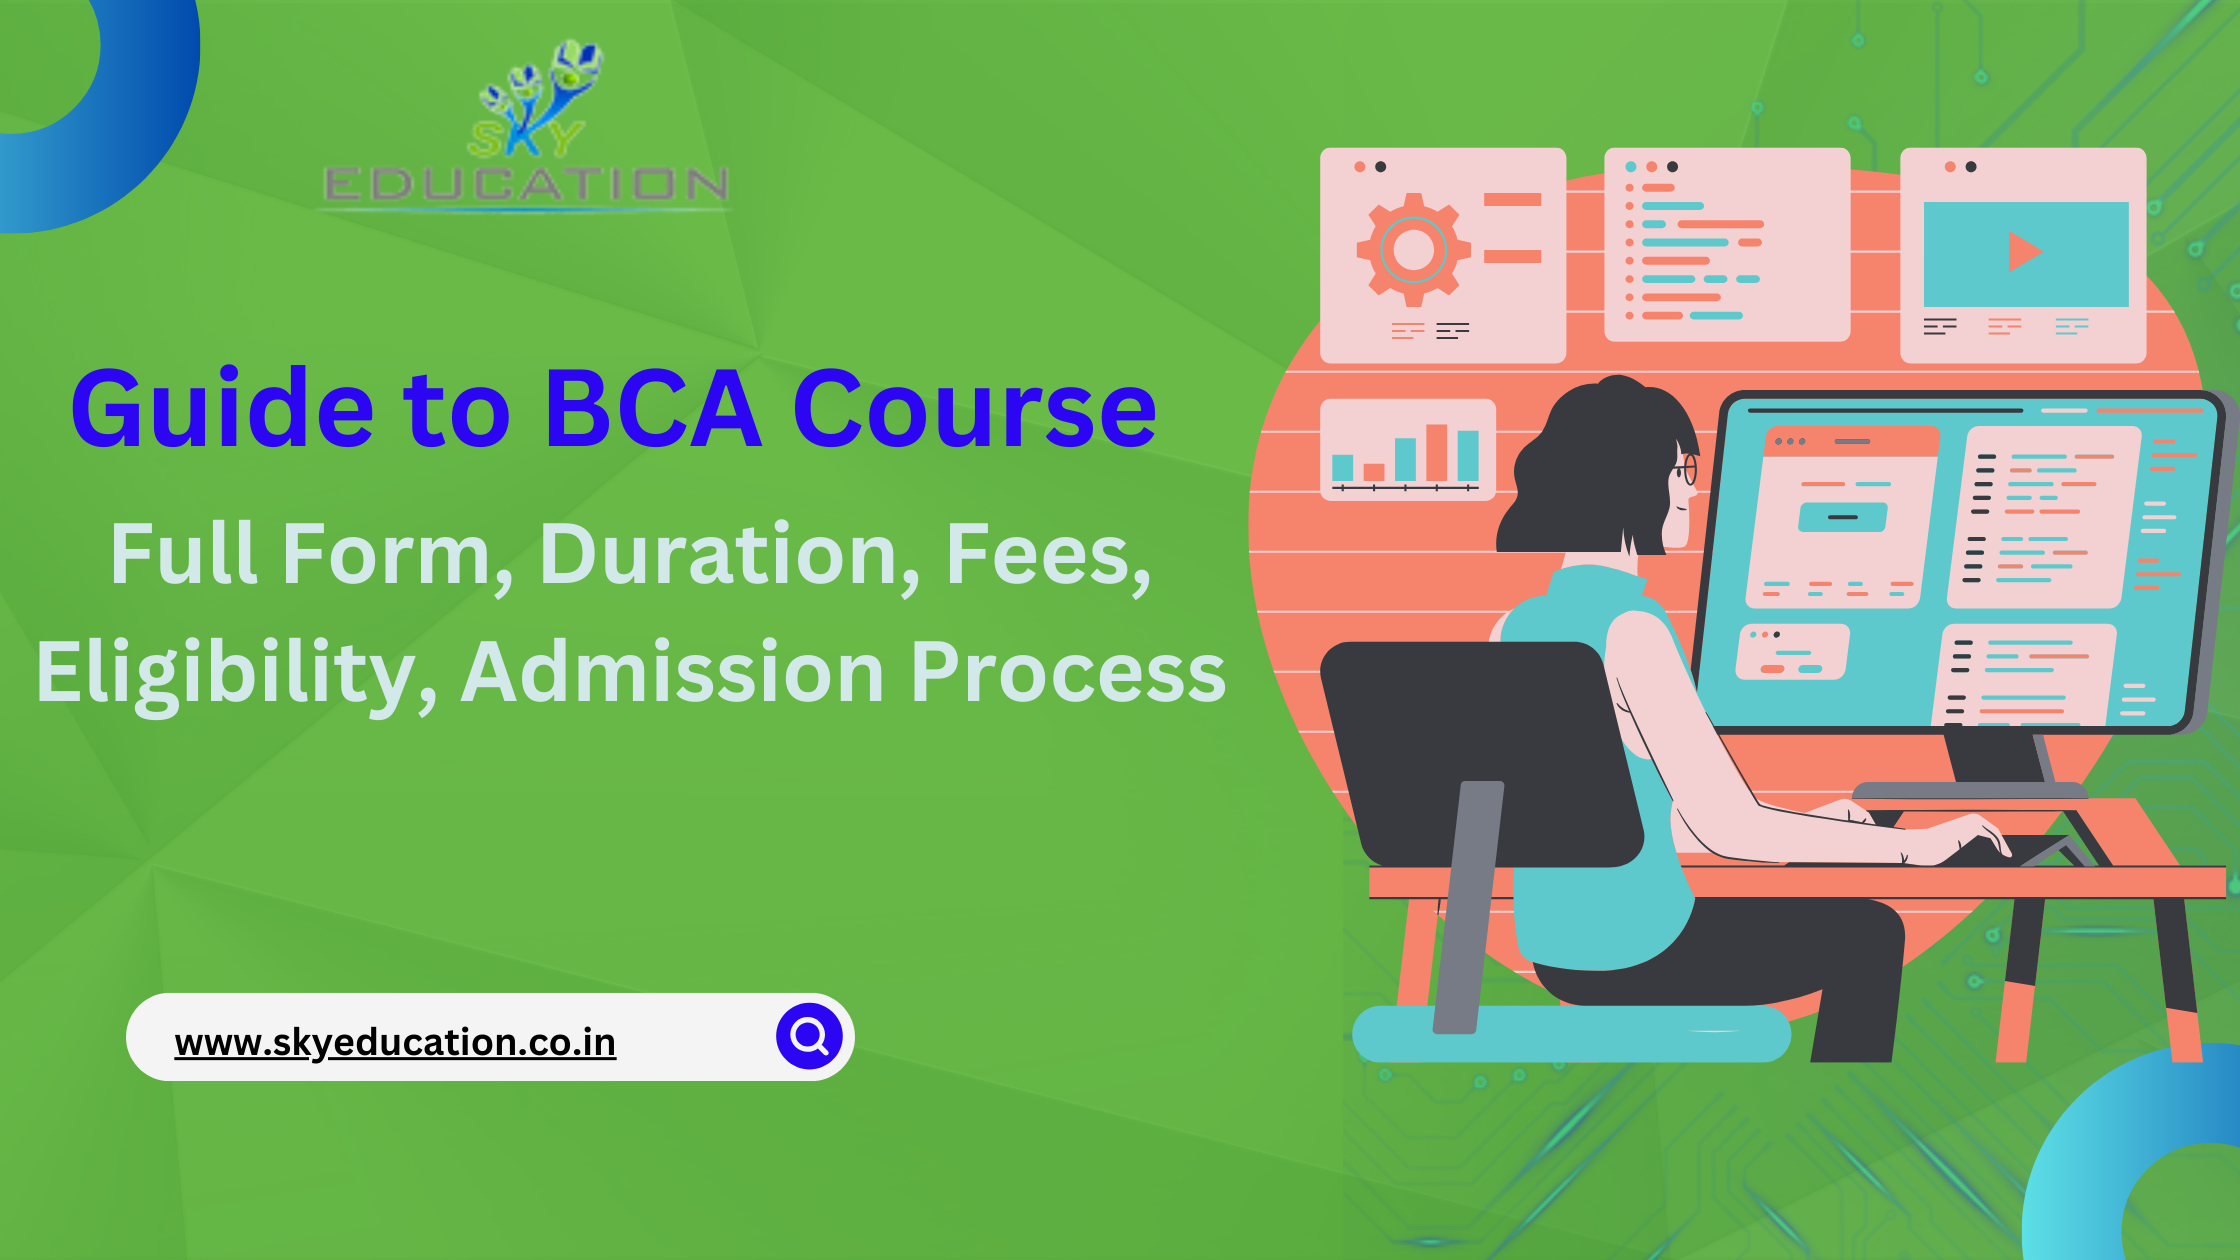 BCA Courses: Full Form, Duration, Fees, Eligibility, and More 'photo